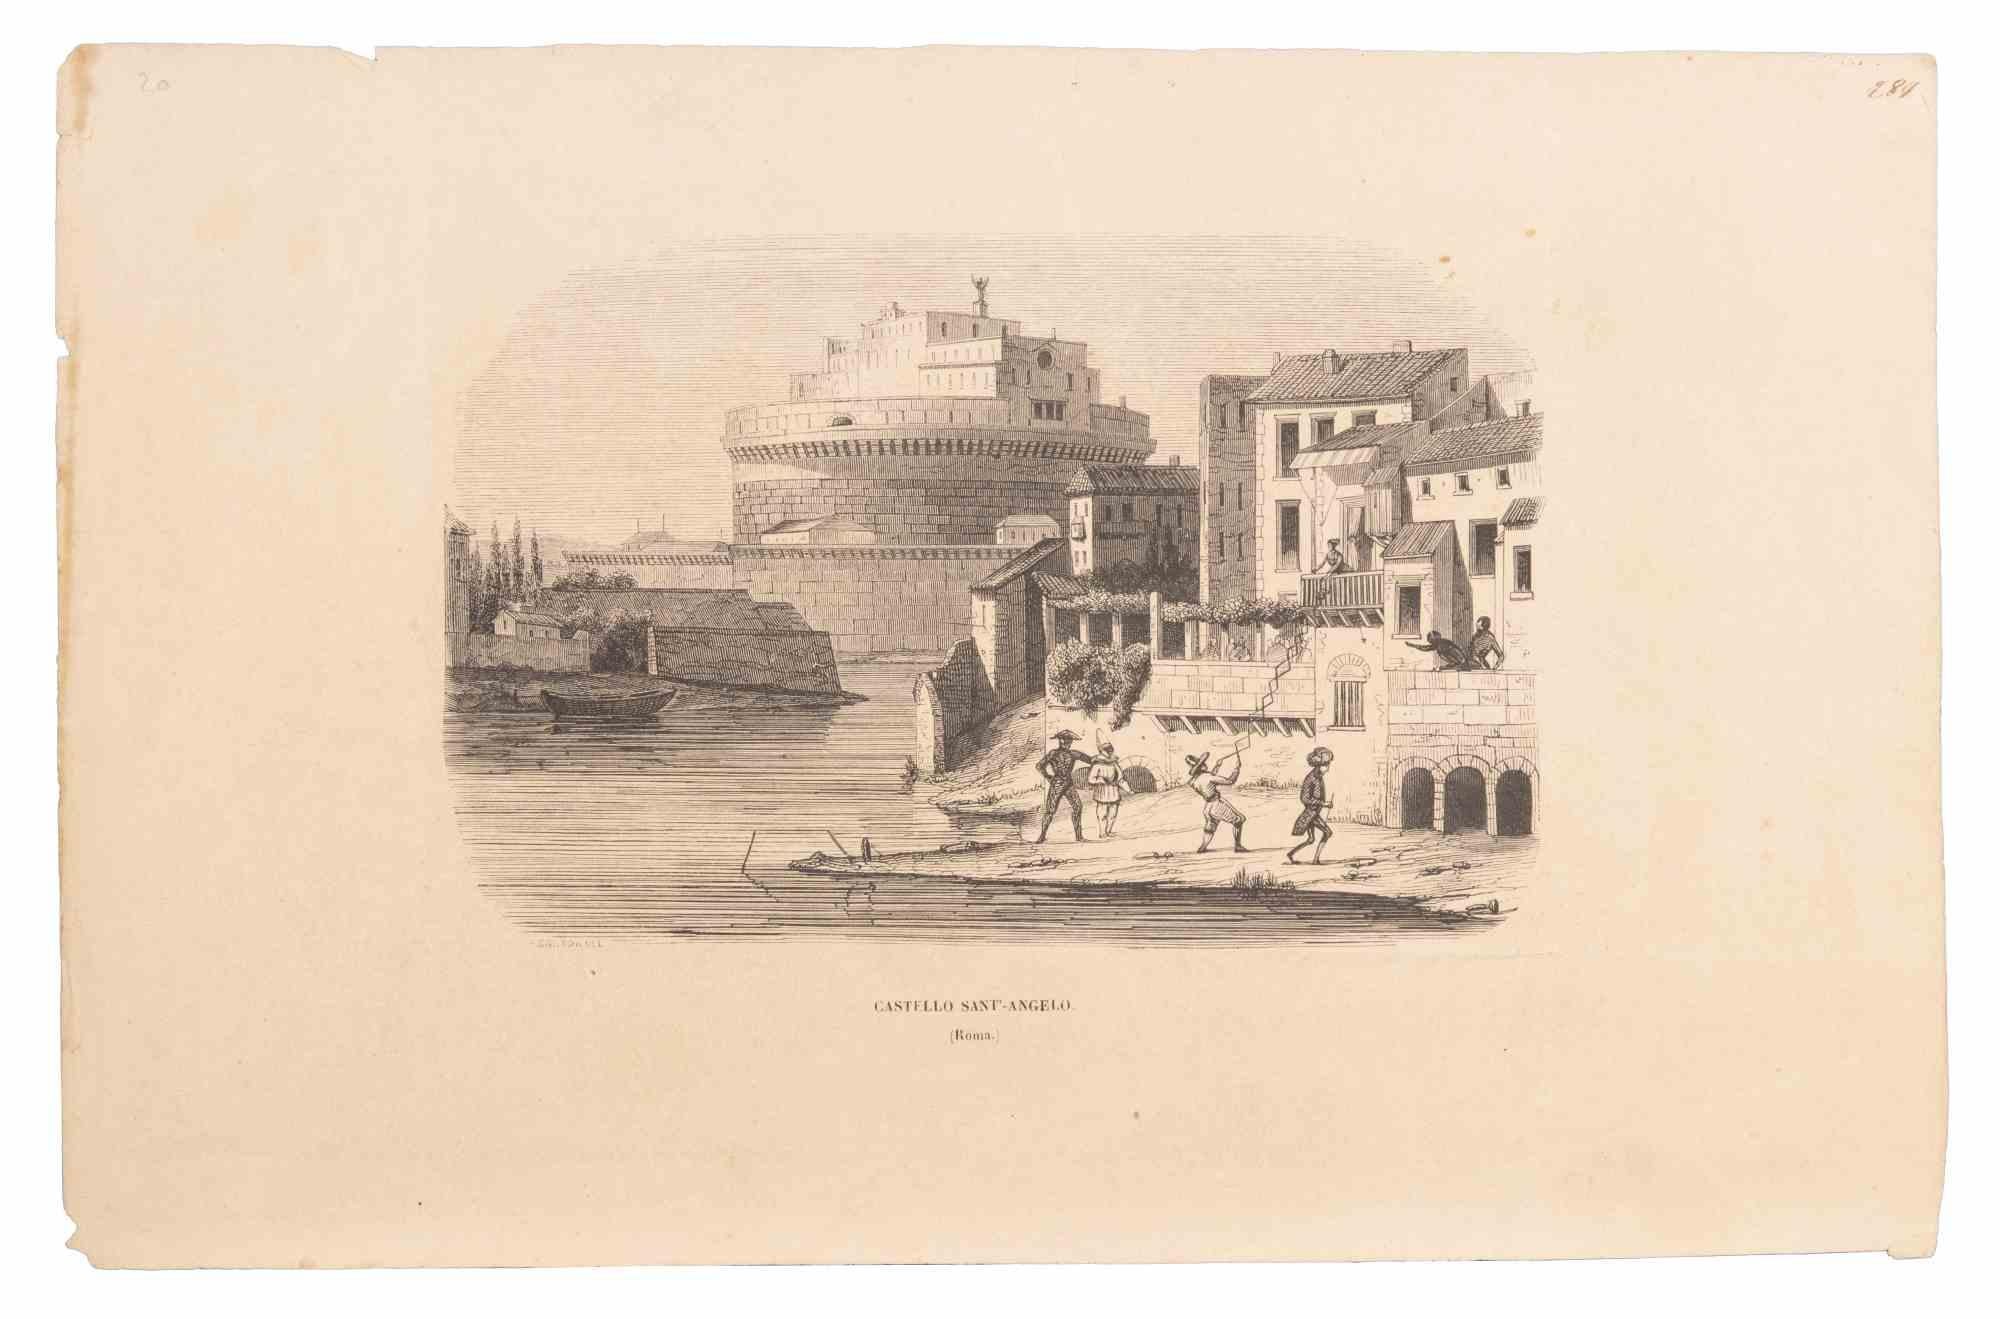 Unknown Landscape Print - View of Castel Sant'Angelo -  Lithograph - 19th Century